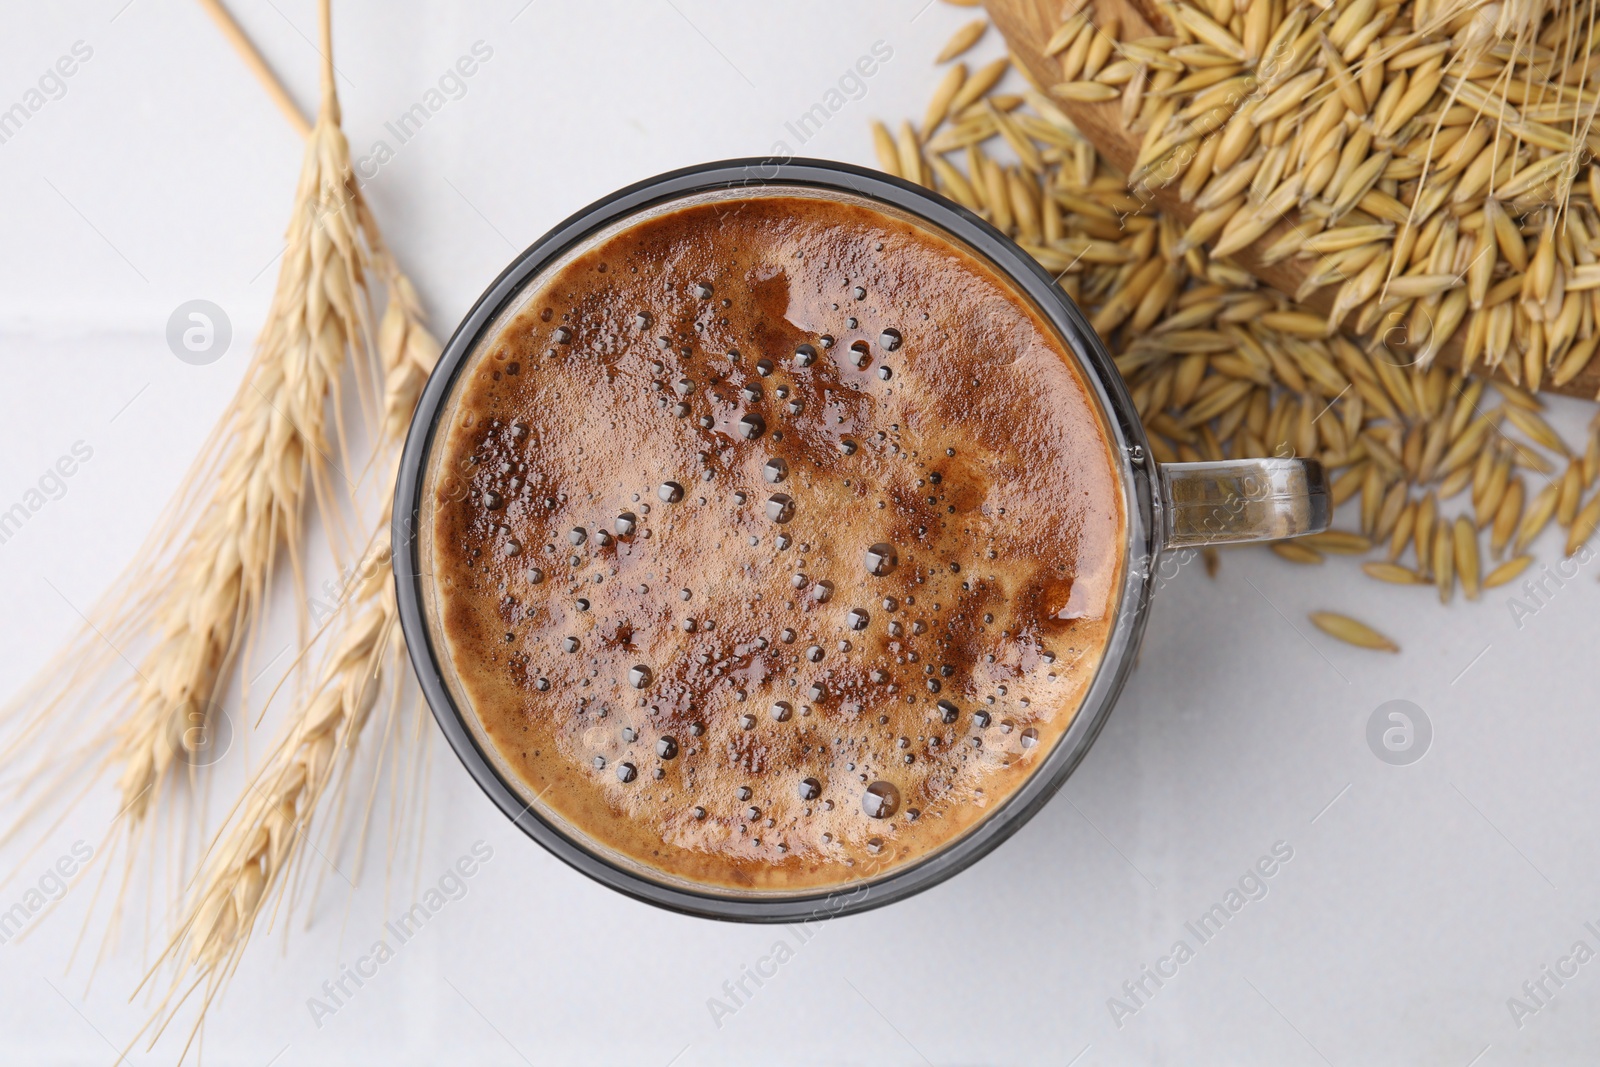 Photo of Cup of barley coffee, grains and spikes on white table, flat lay